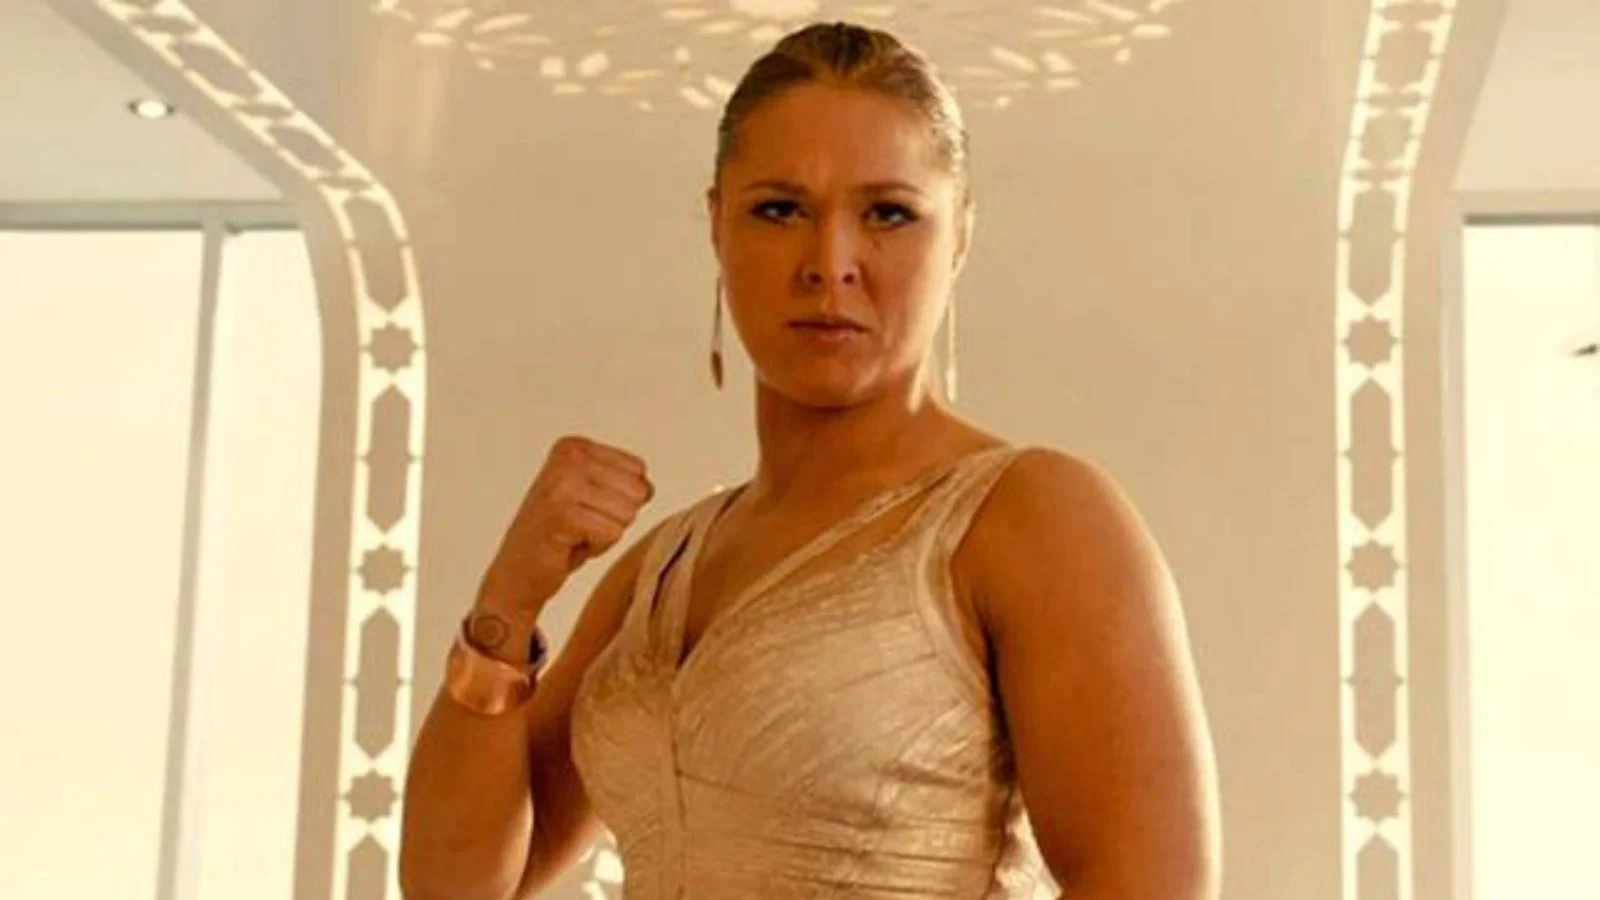 Ronda Rousey in Furious 7